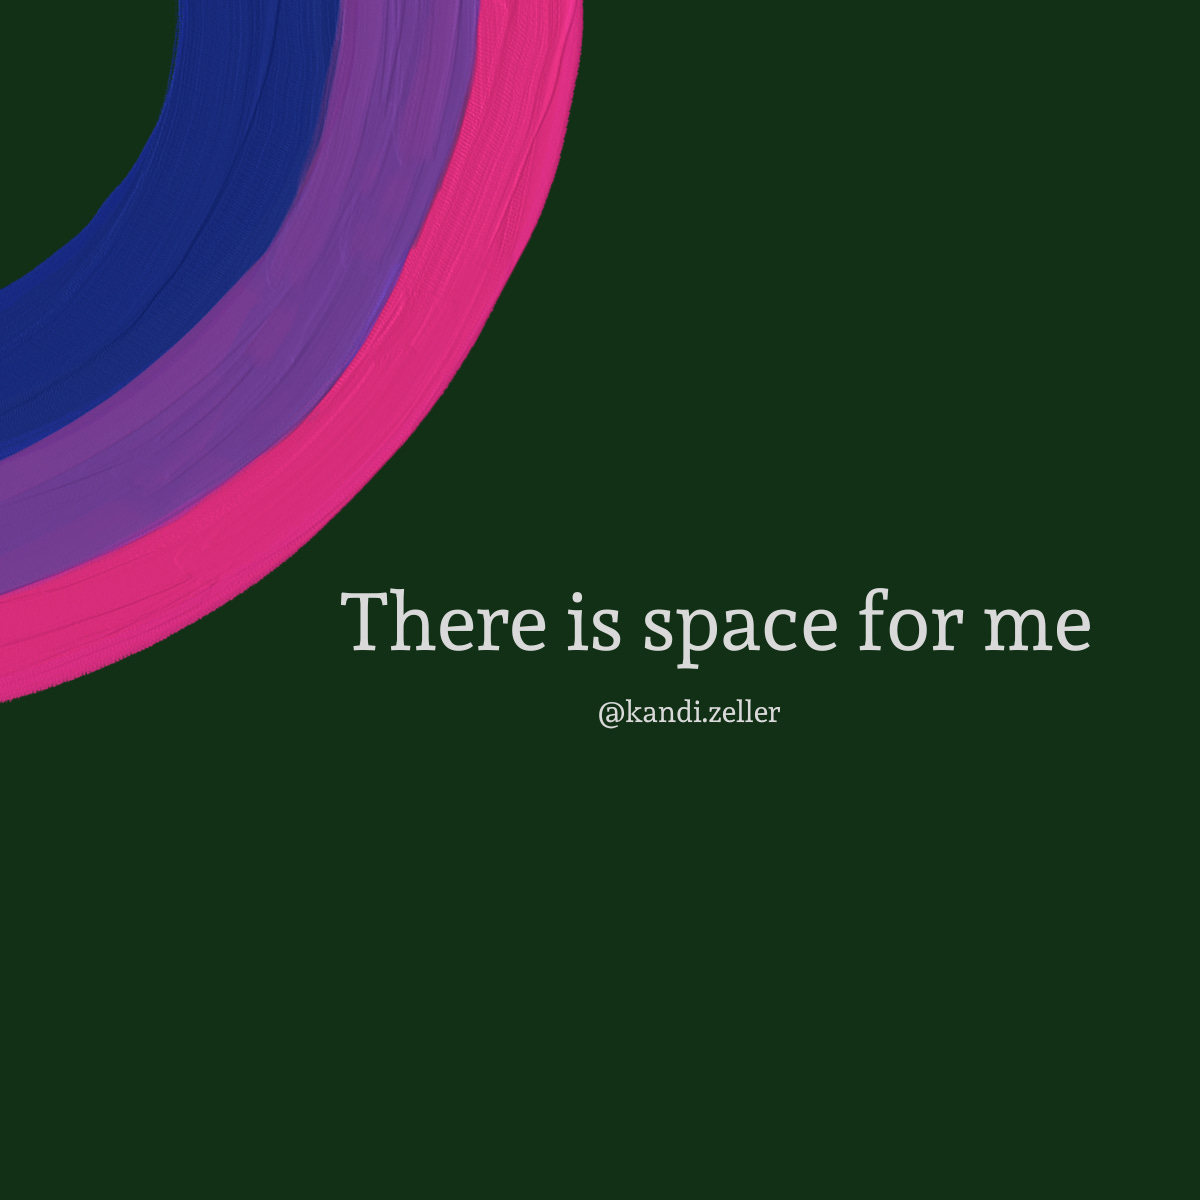 A dark green background, adorned with what looks like a  paint stroke with the bi flag colors, has white lettering that reads, “There is space for me.”